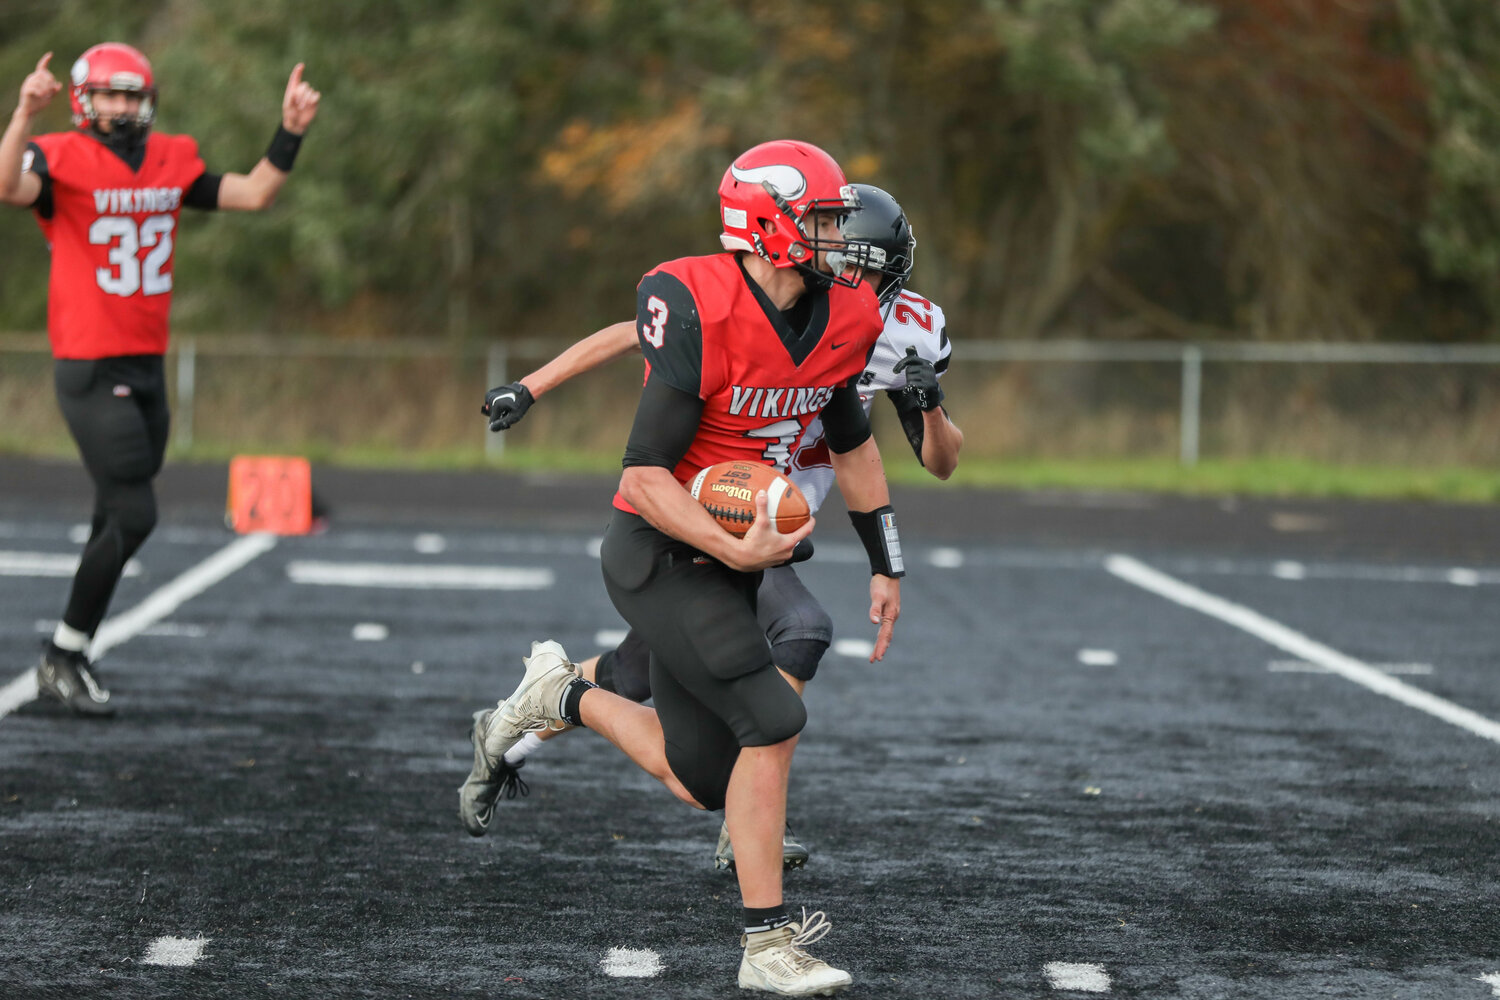 Easton Kolb takes off for a 33-yard touchdown run in the first half of Mossyrock's 46-30 win over Almira-Coulee-Hartline in the 1B state quarterfinals, Nov. 18 in Tenino.